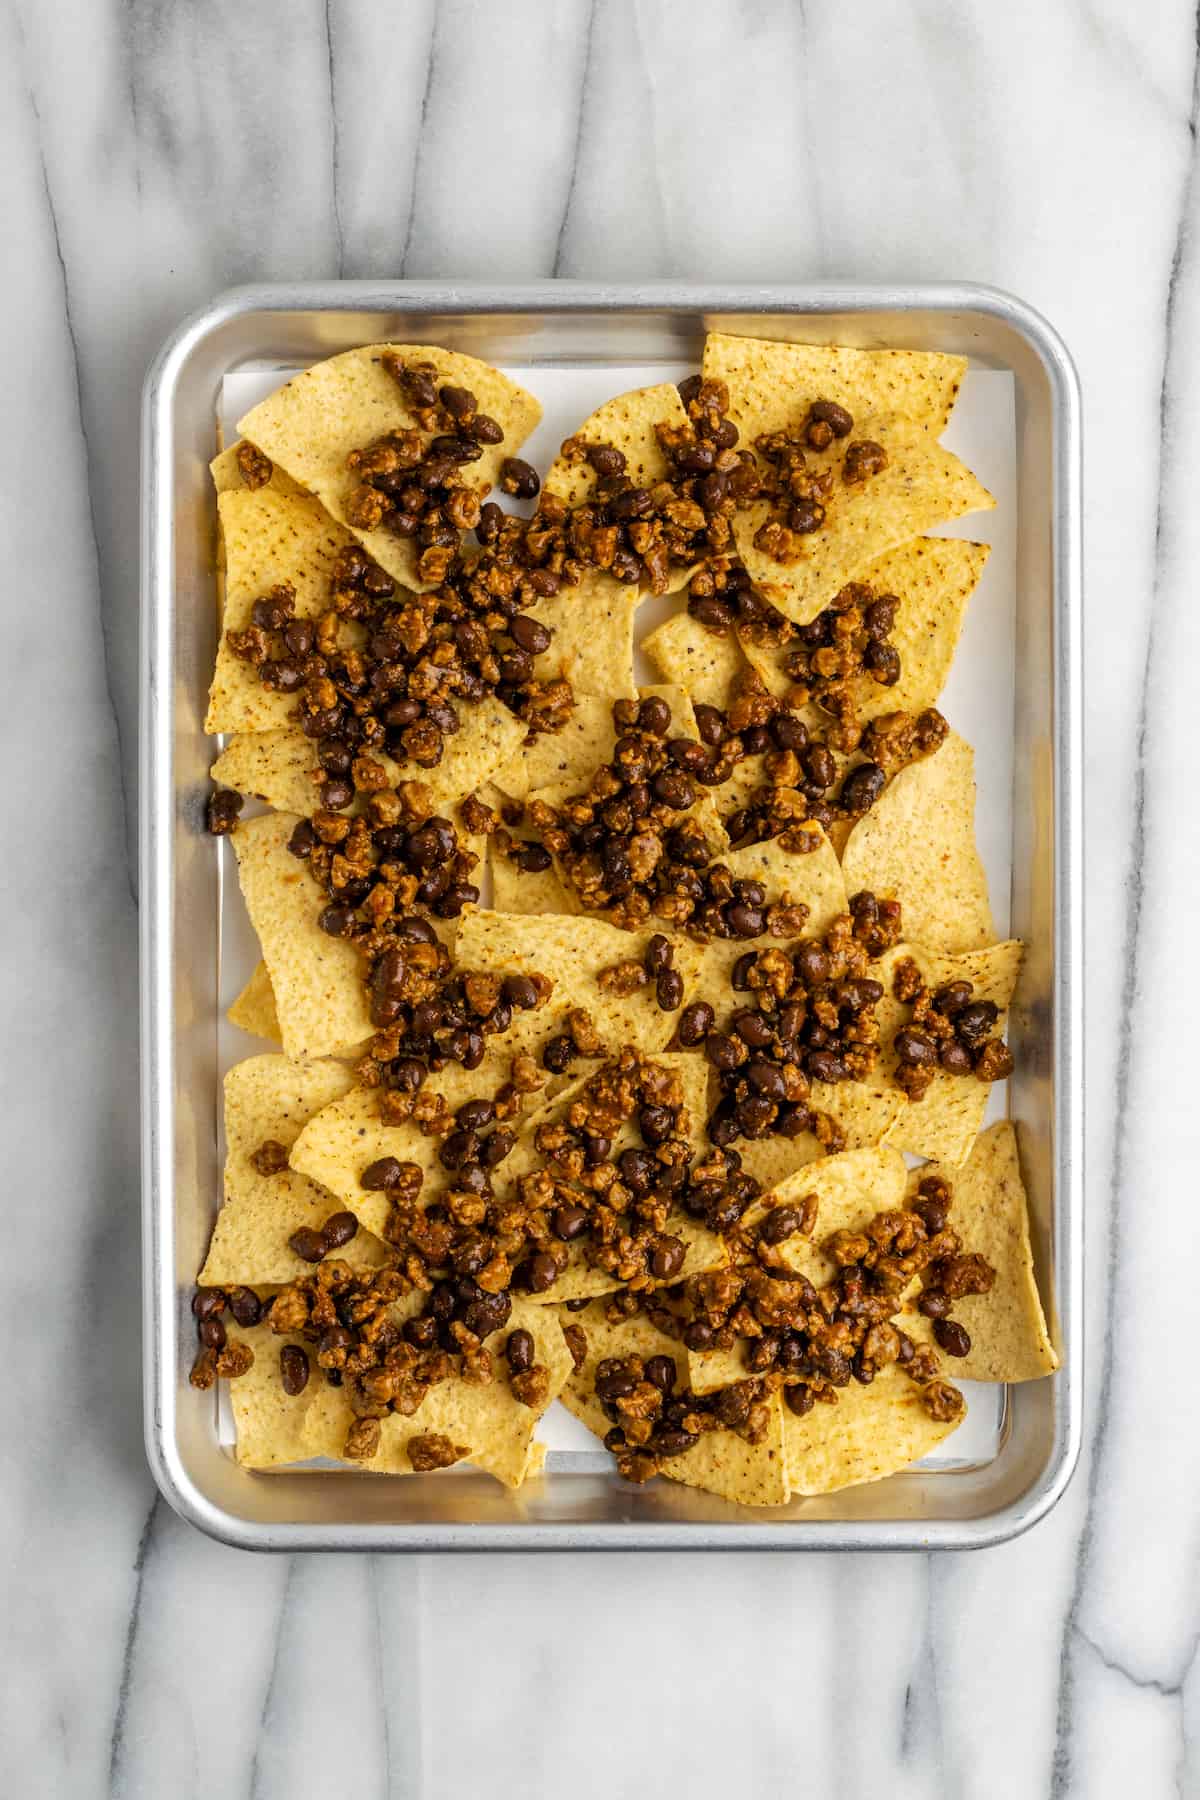 A baking tray with a layer of tortilla chips, topped with a mixture of black beans and vegan meat crumbles